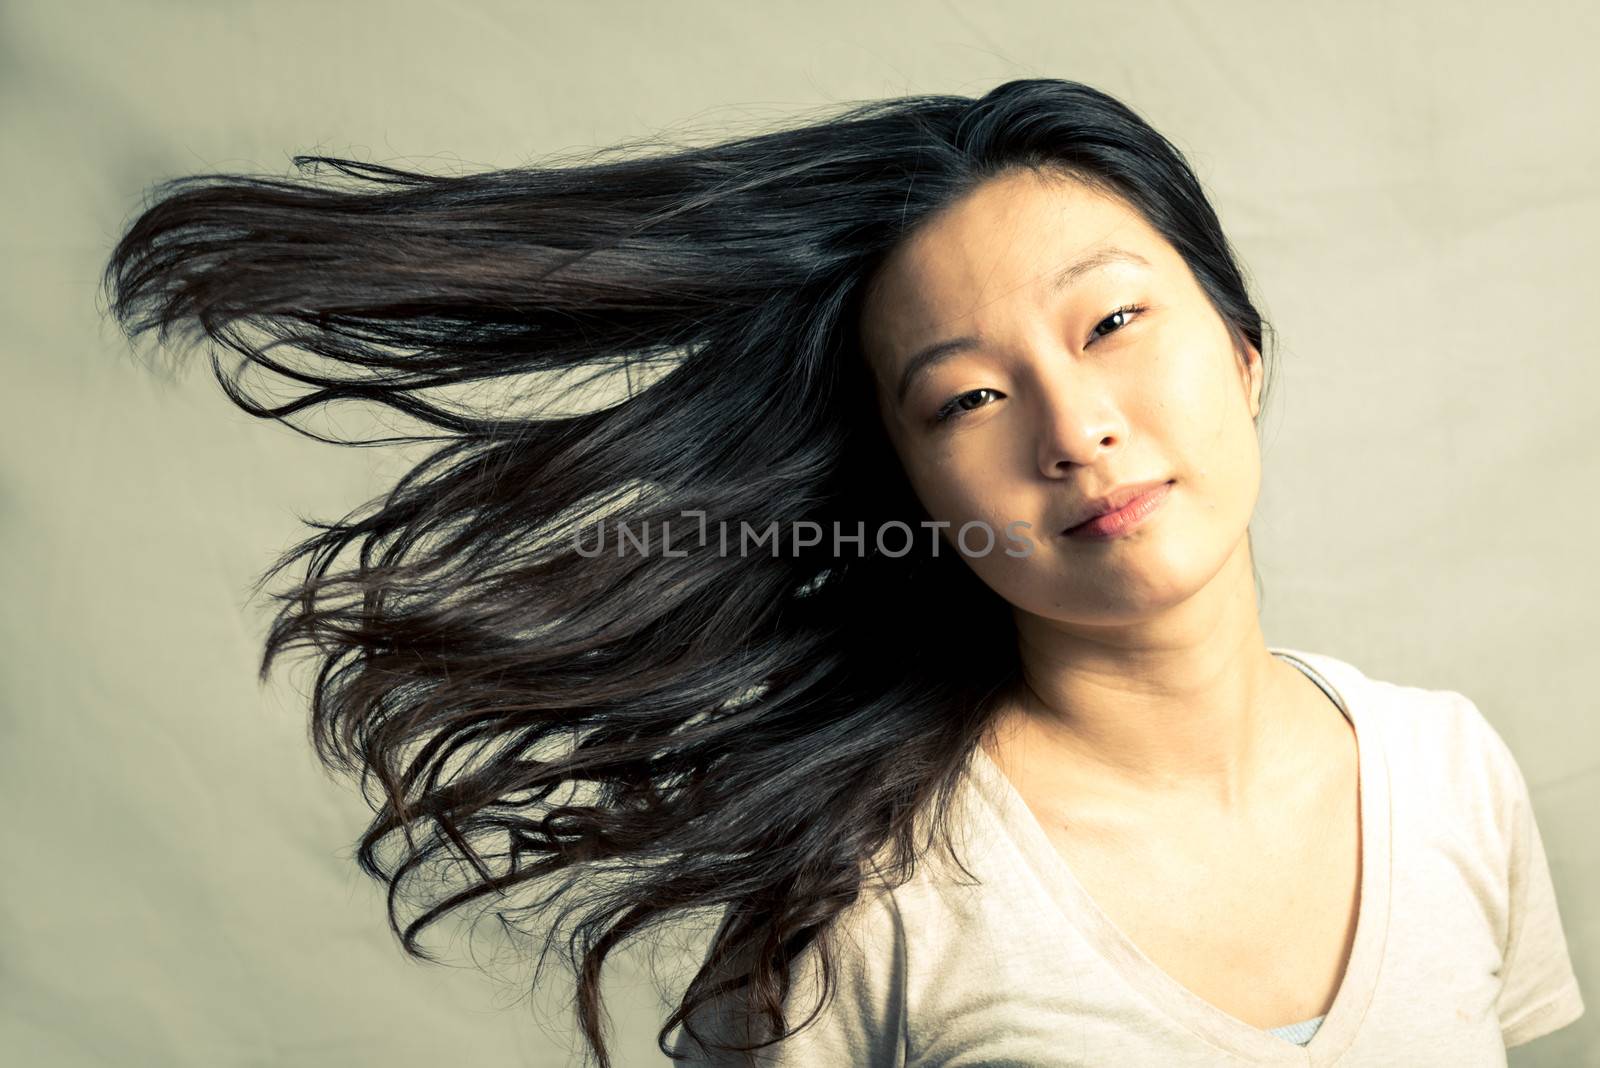 Woman flicking her hair by IVYPHOTOS